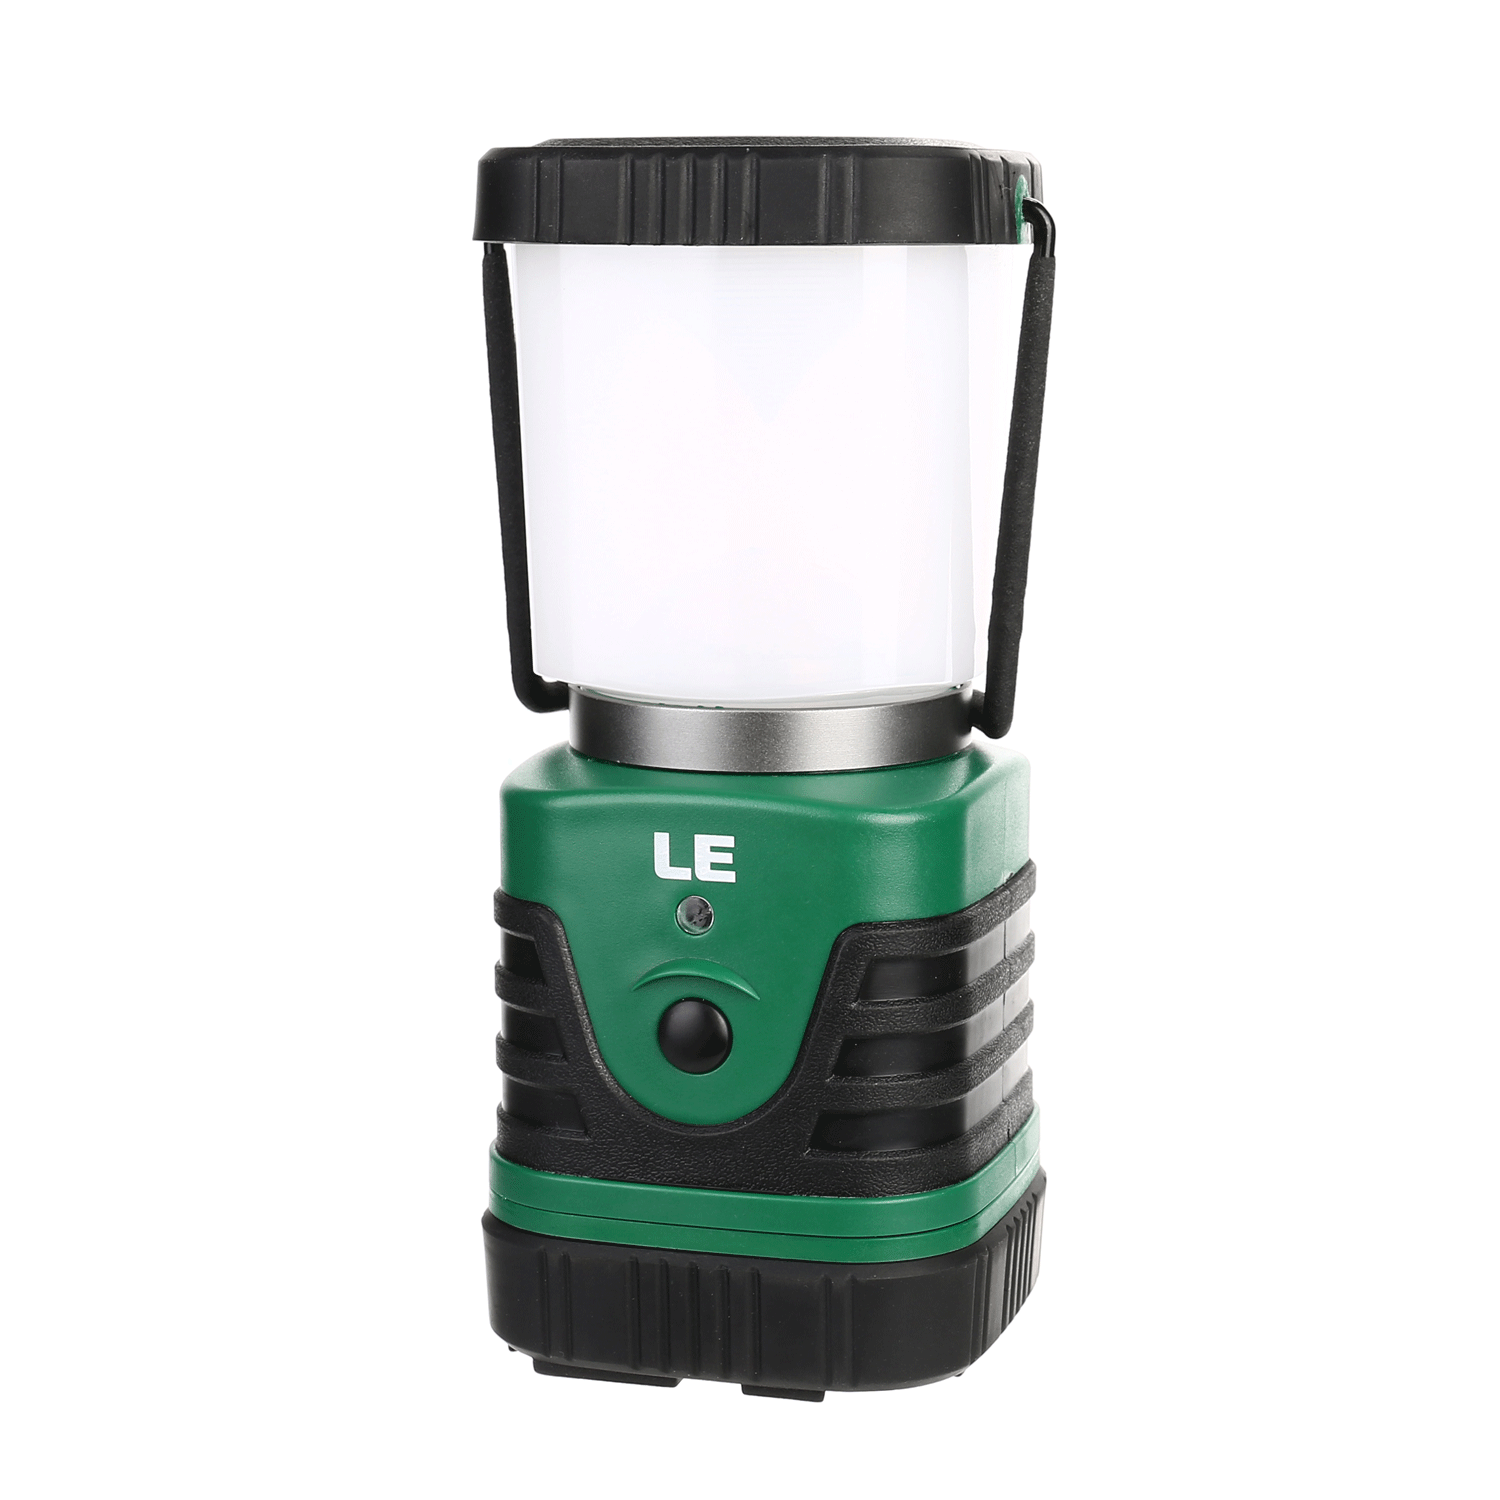 Lighting EVER 1000LM LED Camping Lantern Rechargeable, 4400mAh Power Bank,  Camping Essential with 4 Light Modes, IP44 Waterproof Lantern Flashlight